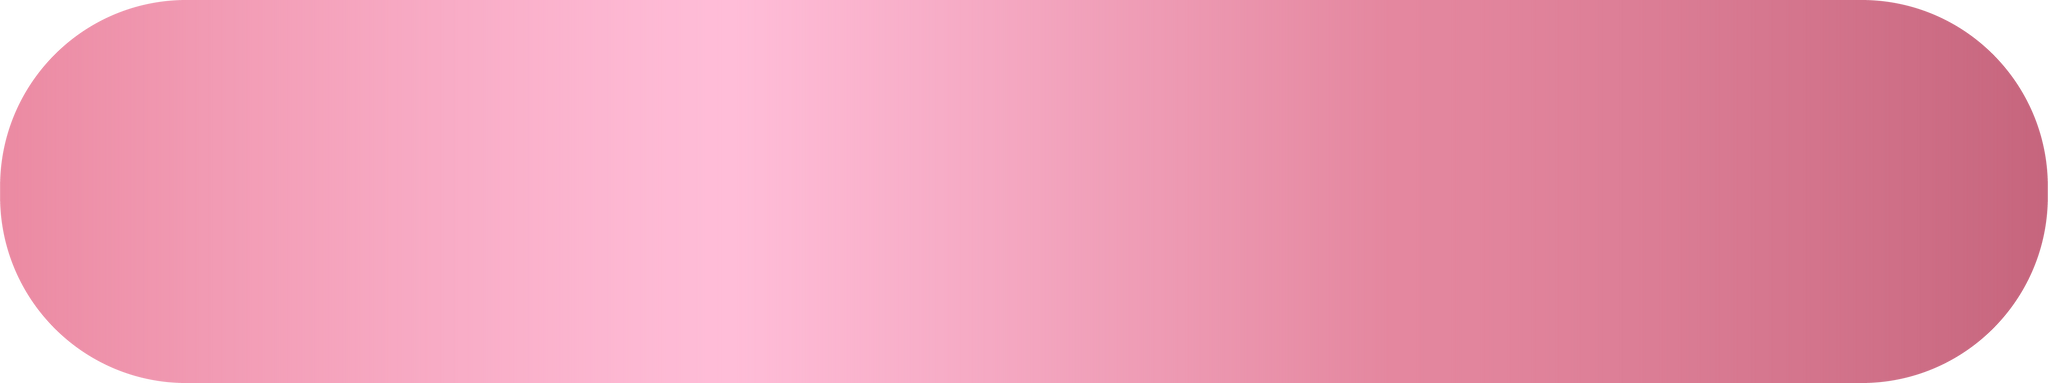 Abstract Pink Gradient Button